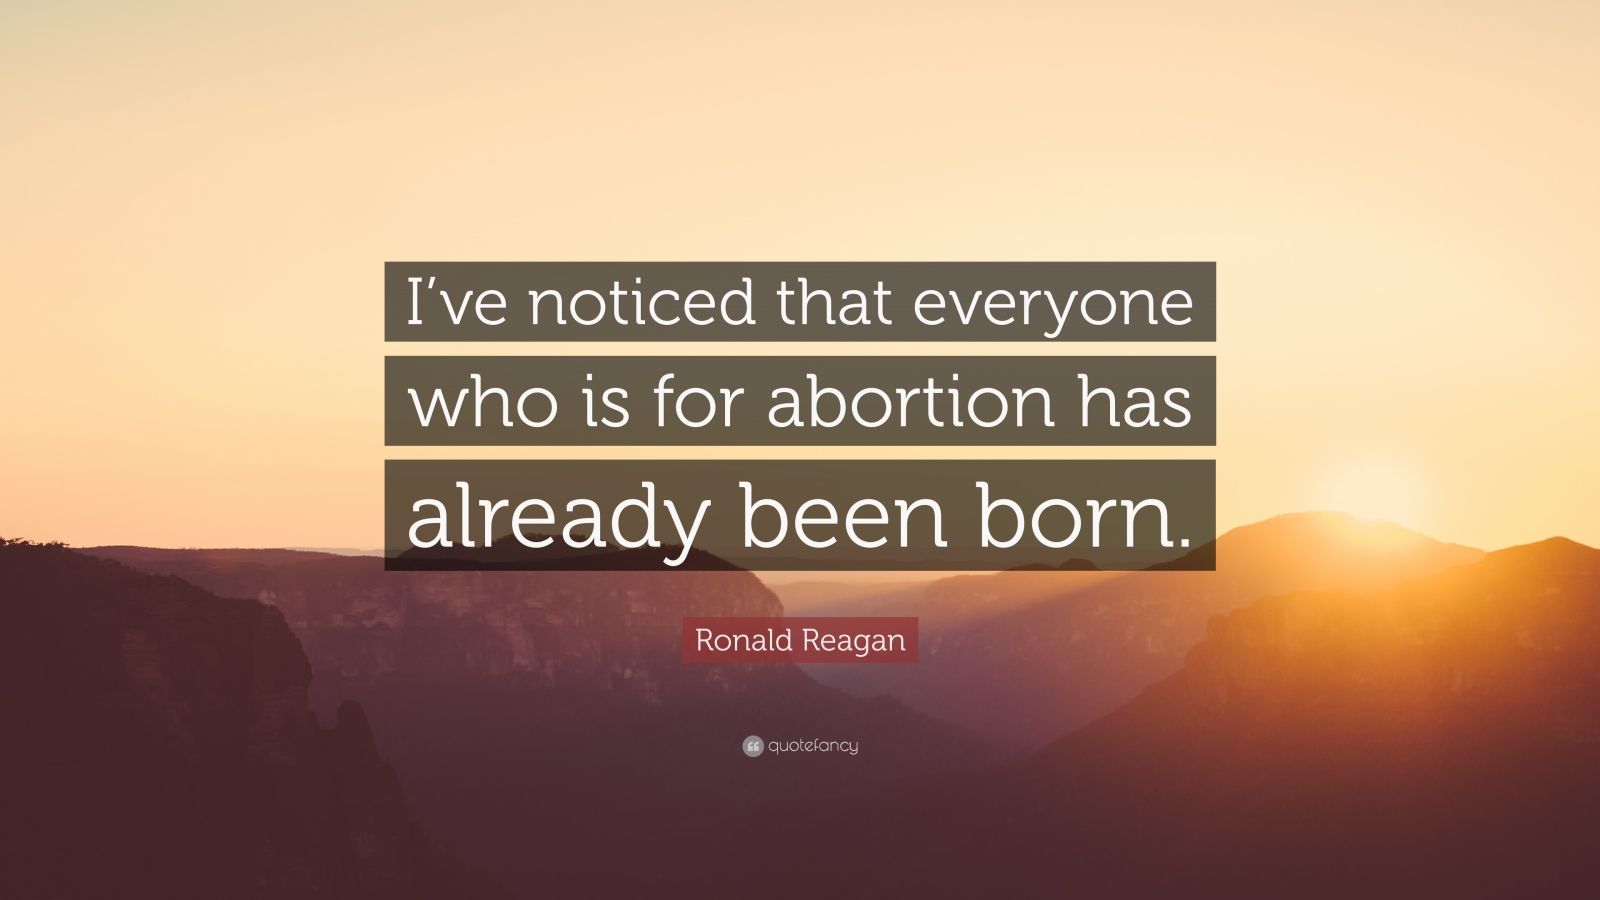 Ronald Reagan Quote: “I've noticed that everyone who is for abortion has already been born.”